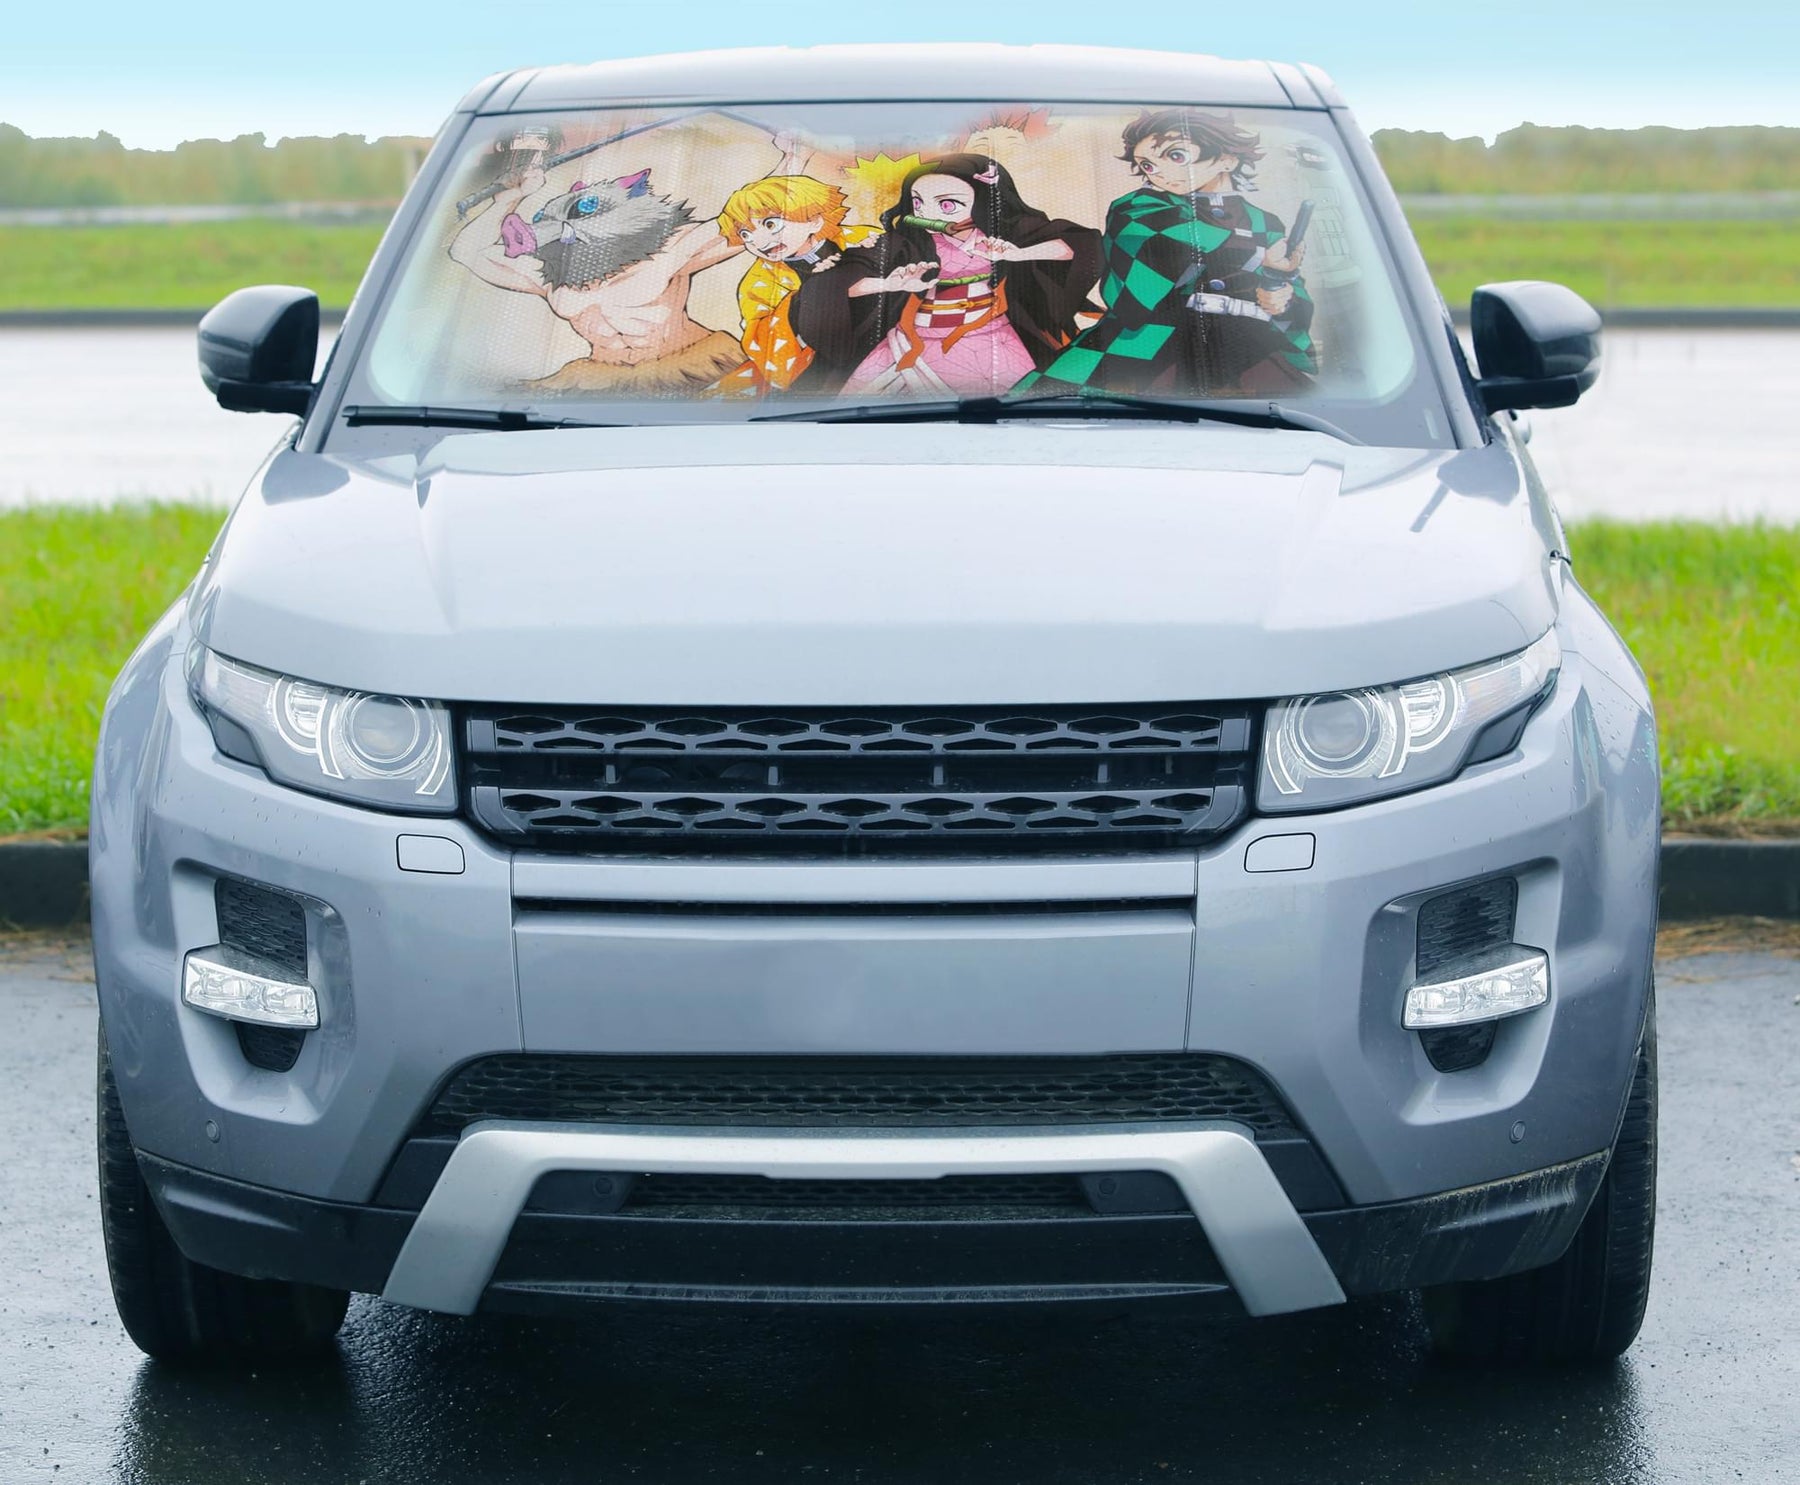 Demon Slayer Characters Accordion Sunshade for Car Windshield | 64 x 32 Inches